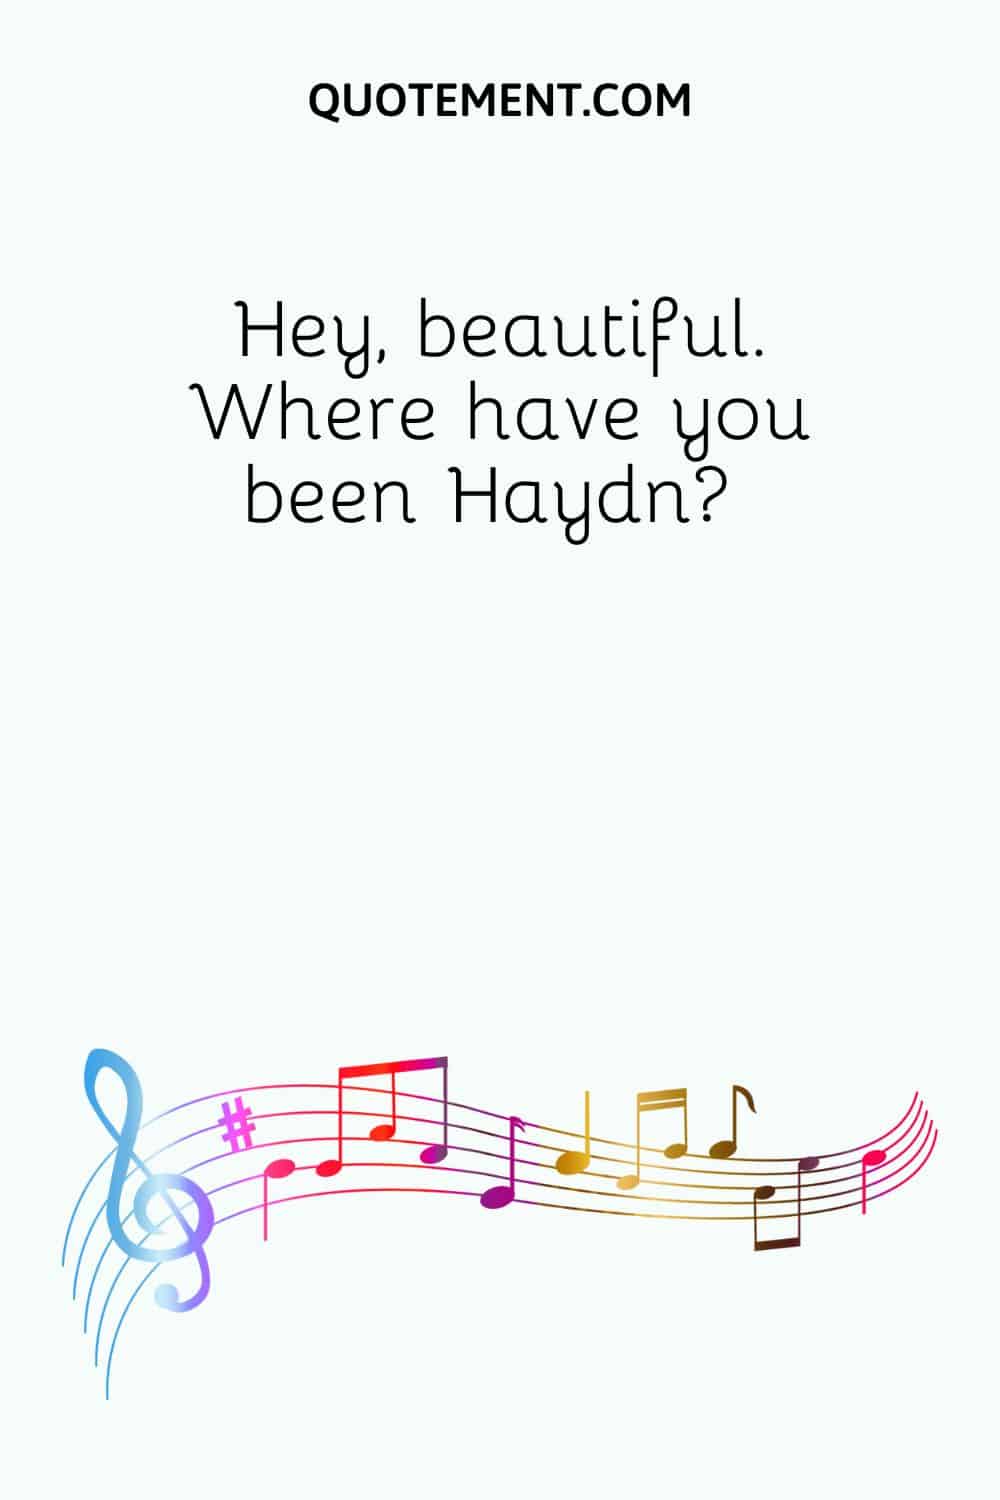 Hey, beautiful. Where have you been Haydn